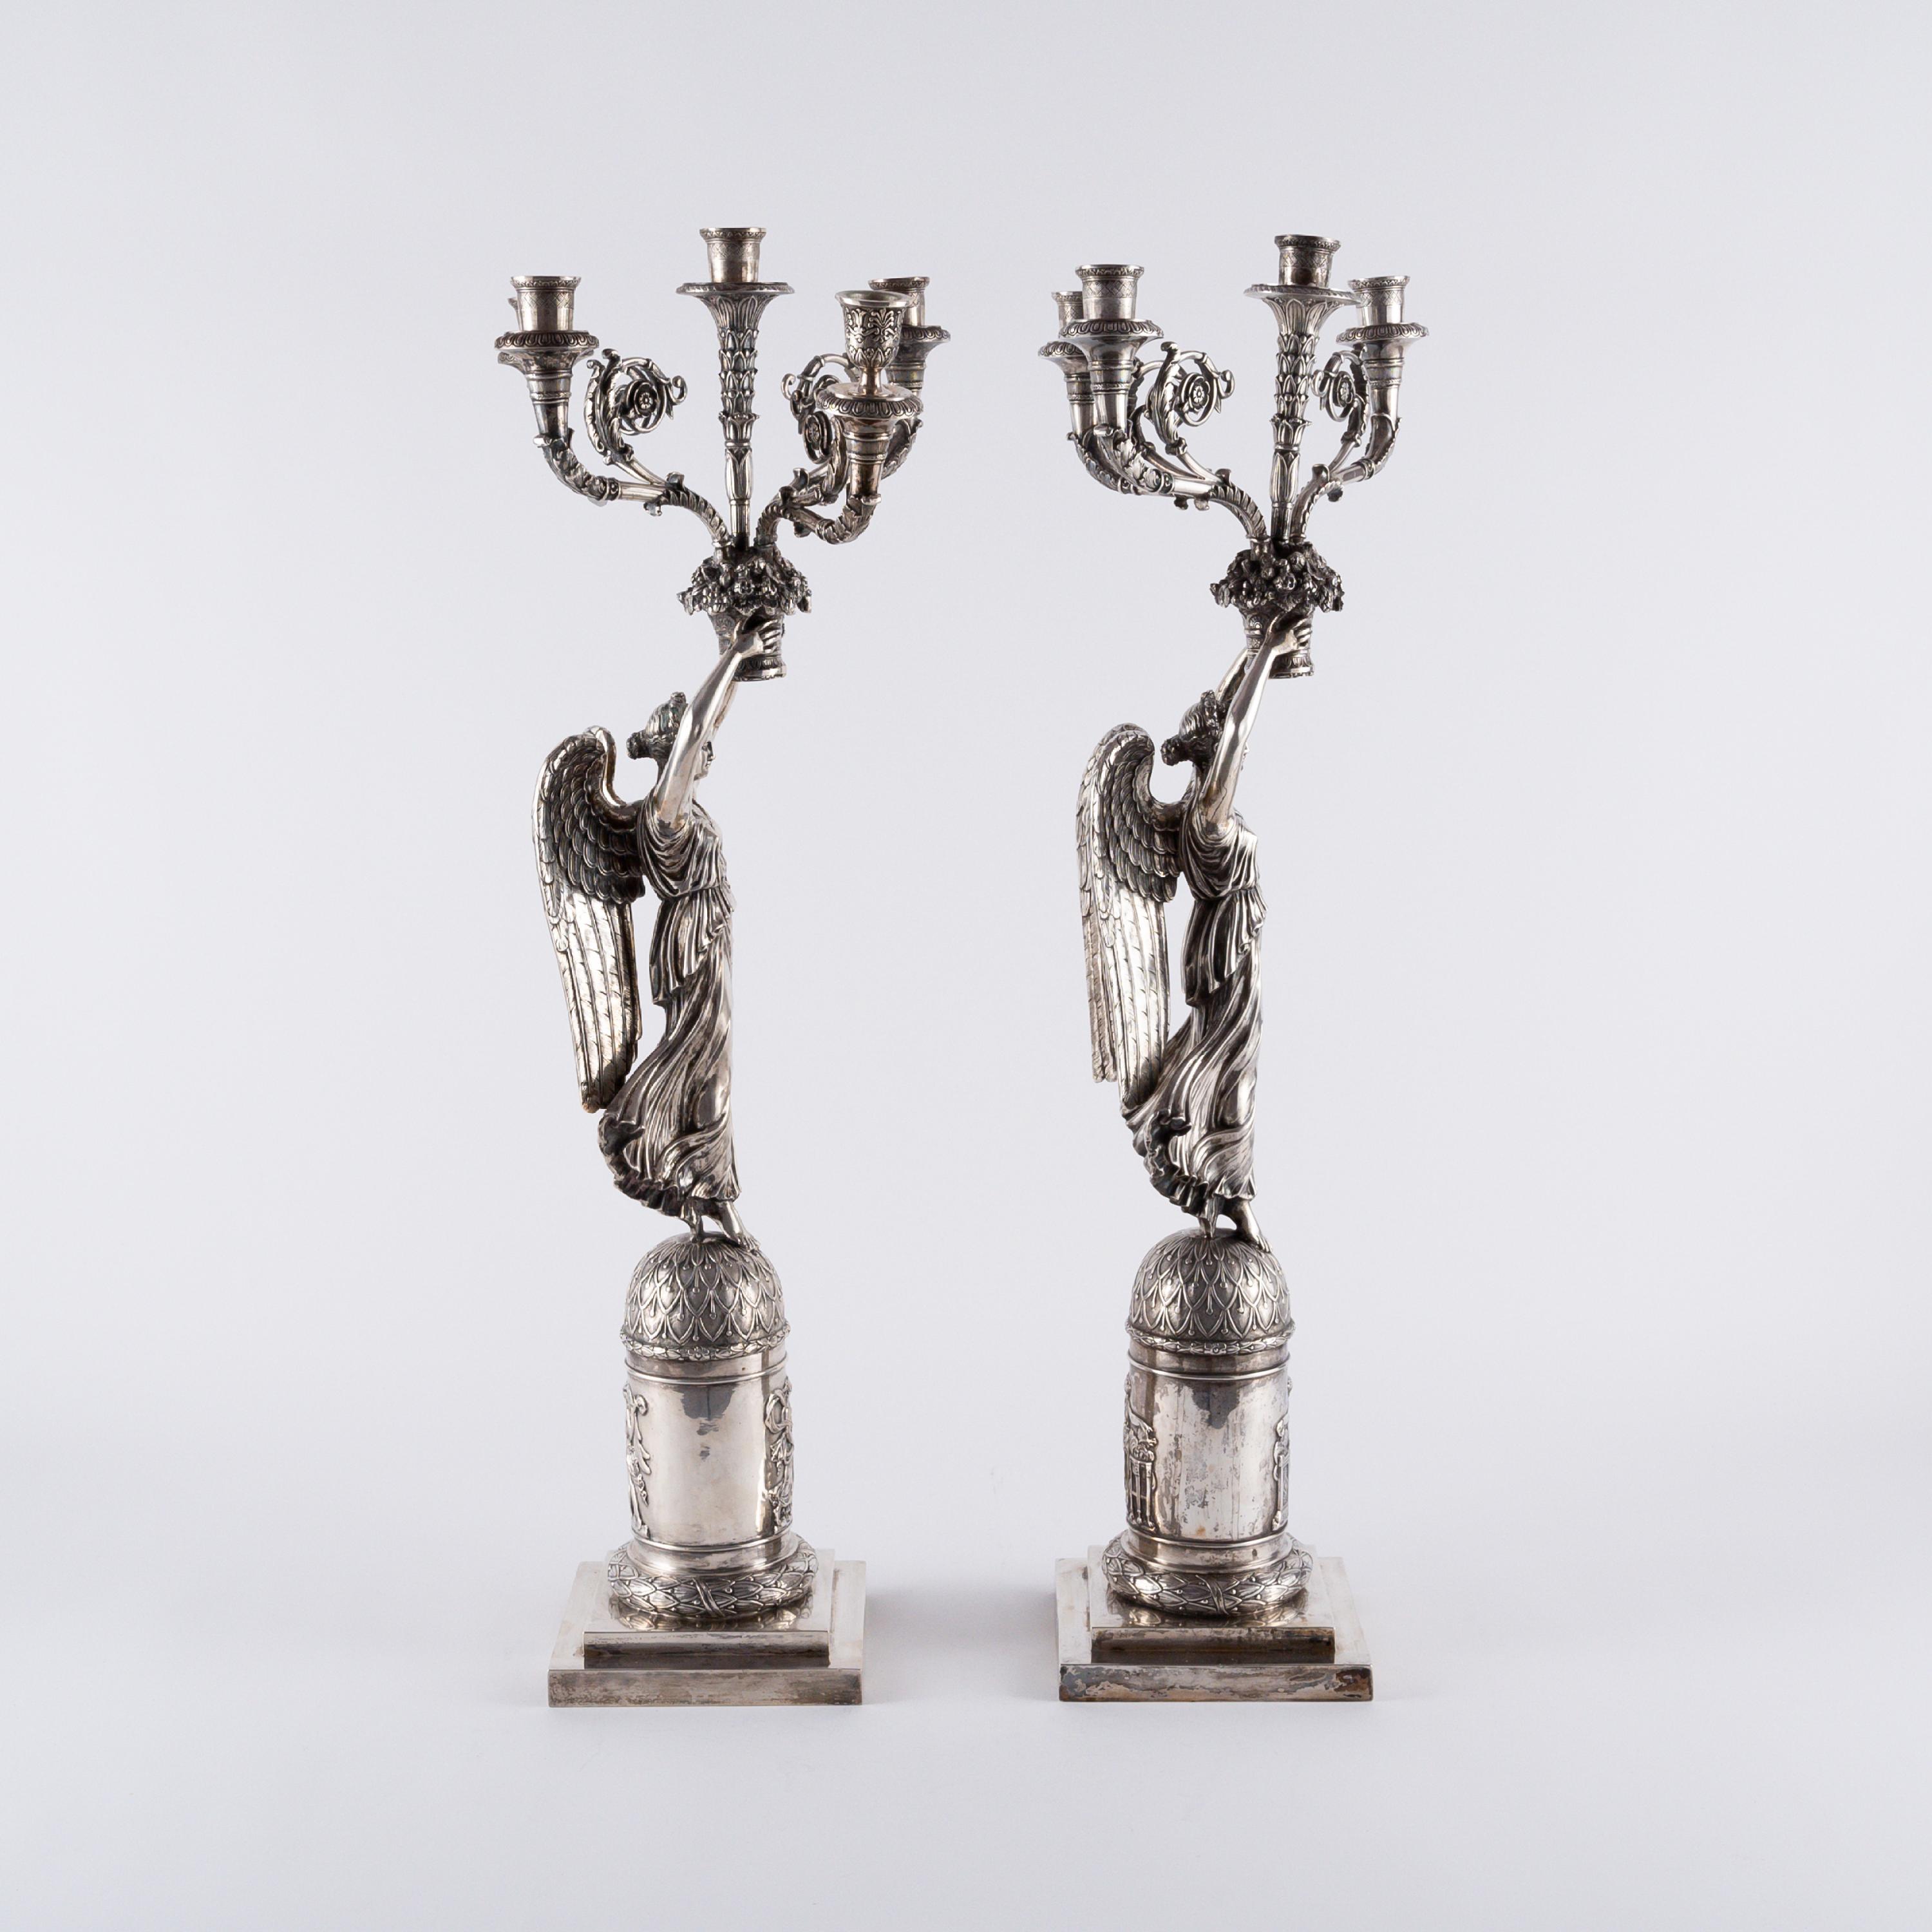 COUPLE OF EXCEPTIONAL SILVER GIRNANDOLES WITH VICTORIAN STYLE EMPIRE - Image 5 of 8